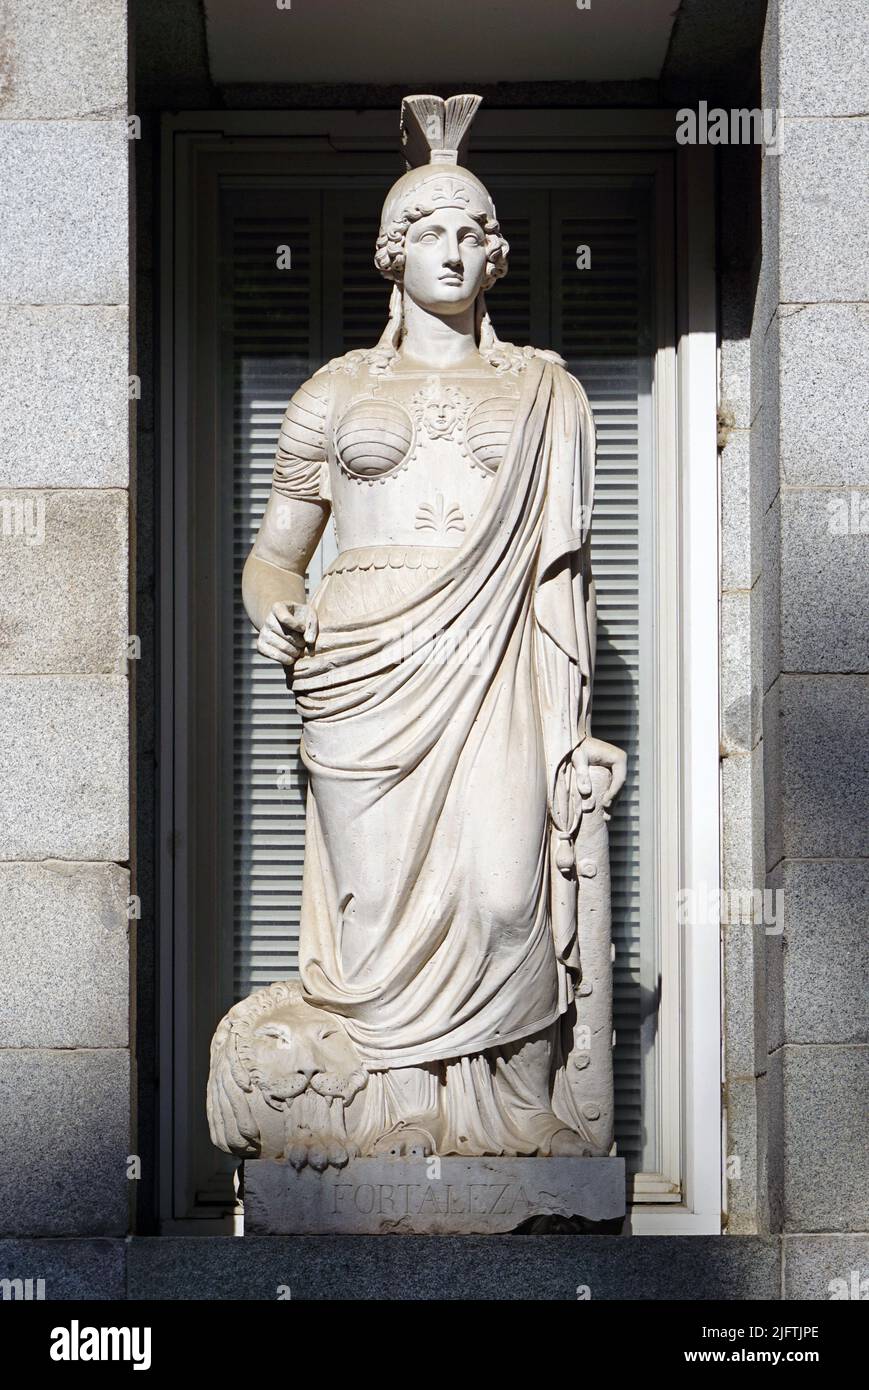 Fortaleza by Valeriano Salvatierra (1789 - 1836) Spanish sculptor.Court sculptor to Ferdinand VII of Spain.This sculpture is one of twelve allegorical sculptures he made for the facade at the Museo del Prado in Madrid,Spain. Stock Photo